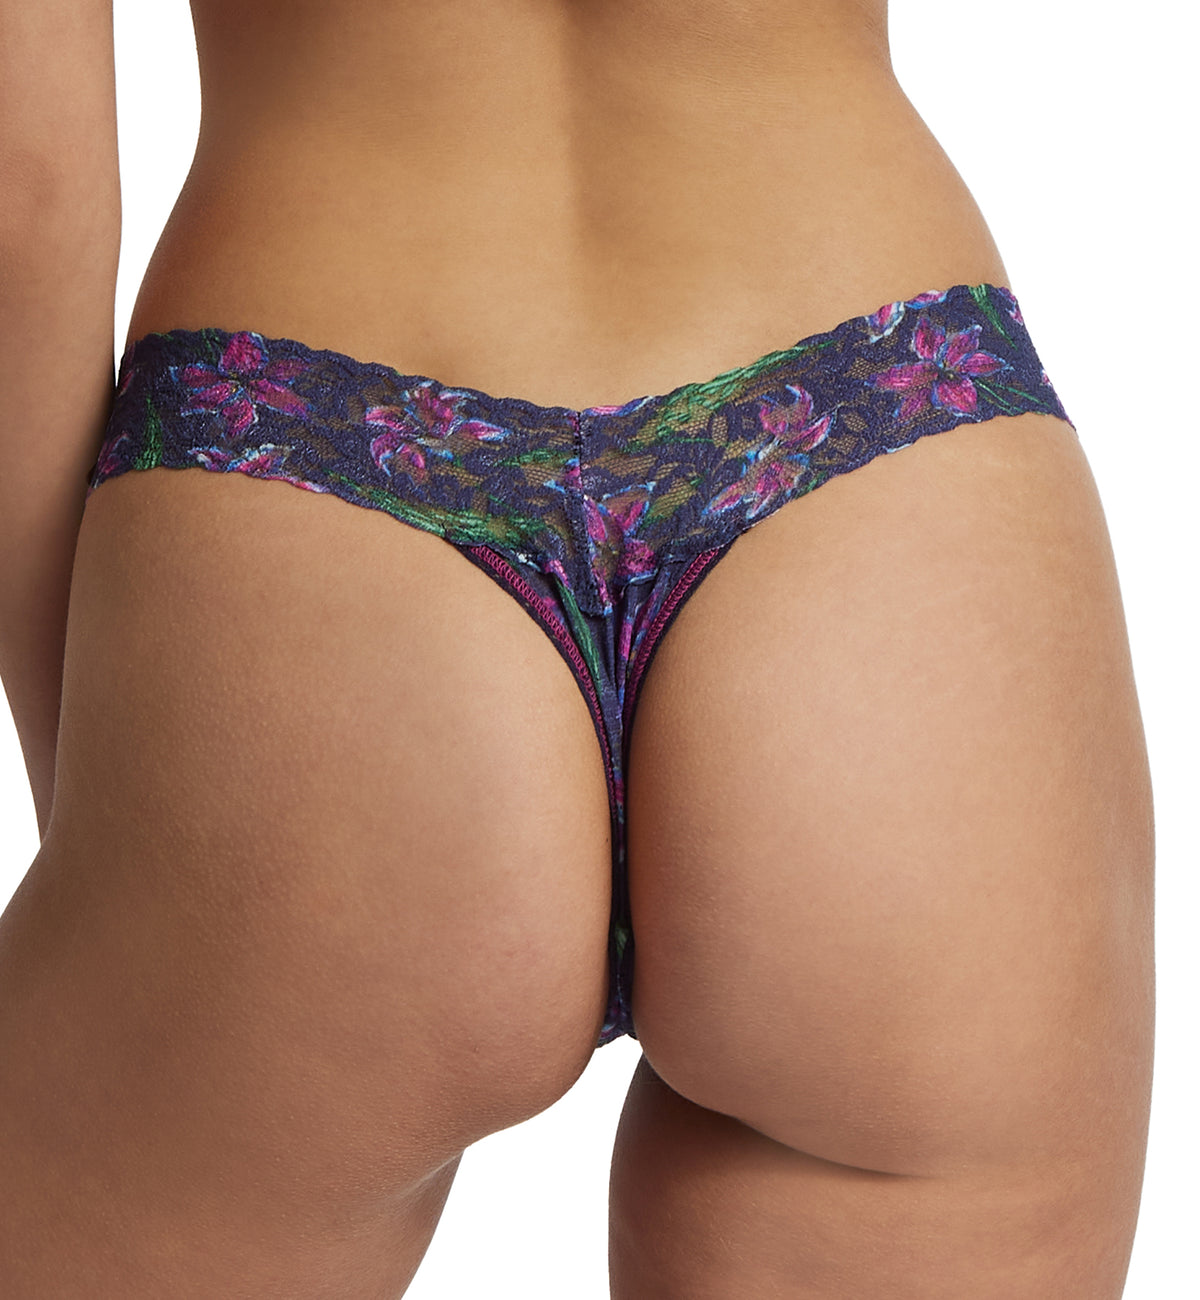 Hanky Panky Signature Lace Printed Low Rise Thong (PR4911P),Twilight Blooms - Twilight Blooms,One Size